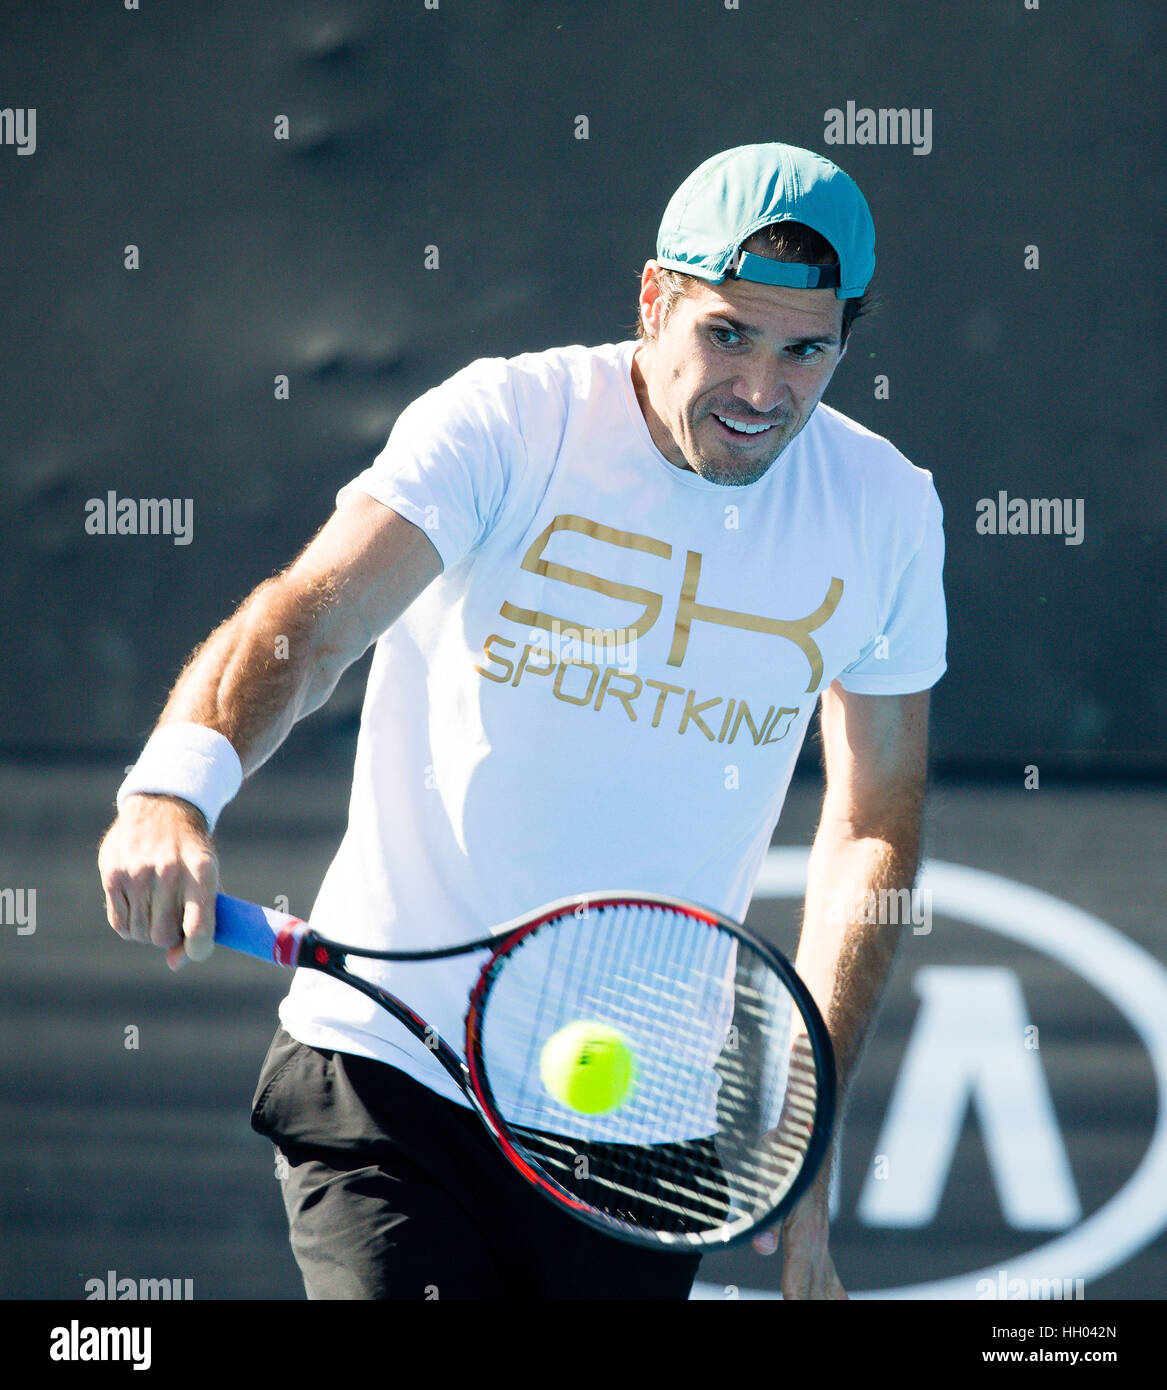 Melbourne, Australia. 15th January 2017. Tommy Haas of Germany during a practice session at the 2017 Australian Open at Melbourne Park in Melbourne, Australia. Credit: Frank Molter/Alamy Live News Stock Photo